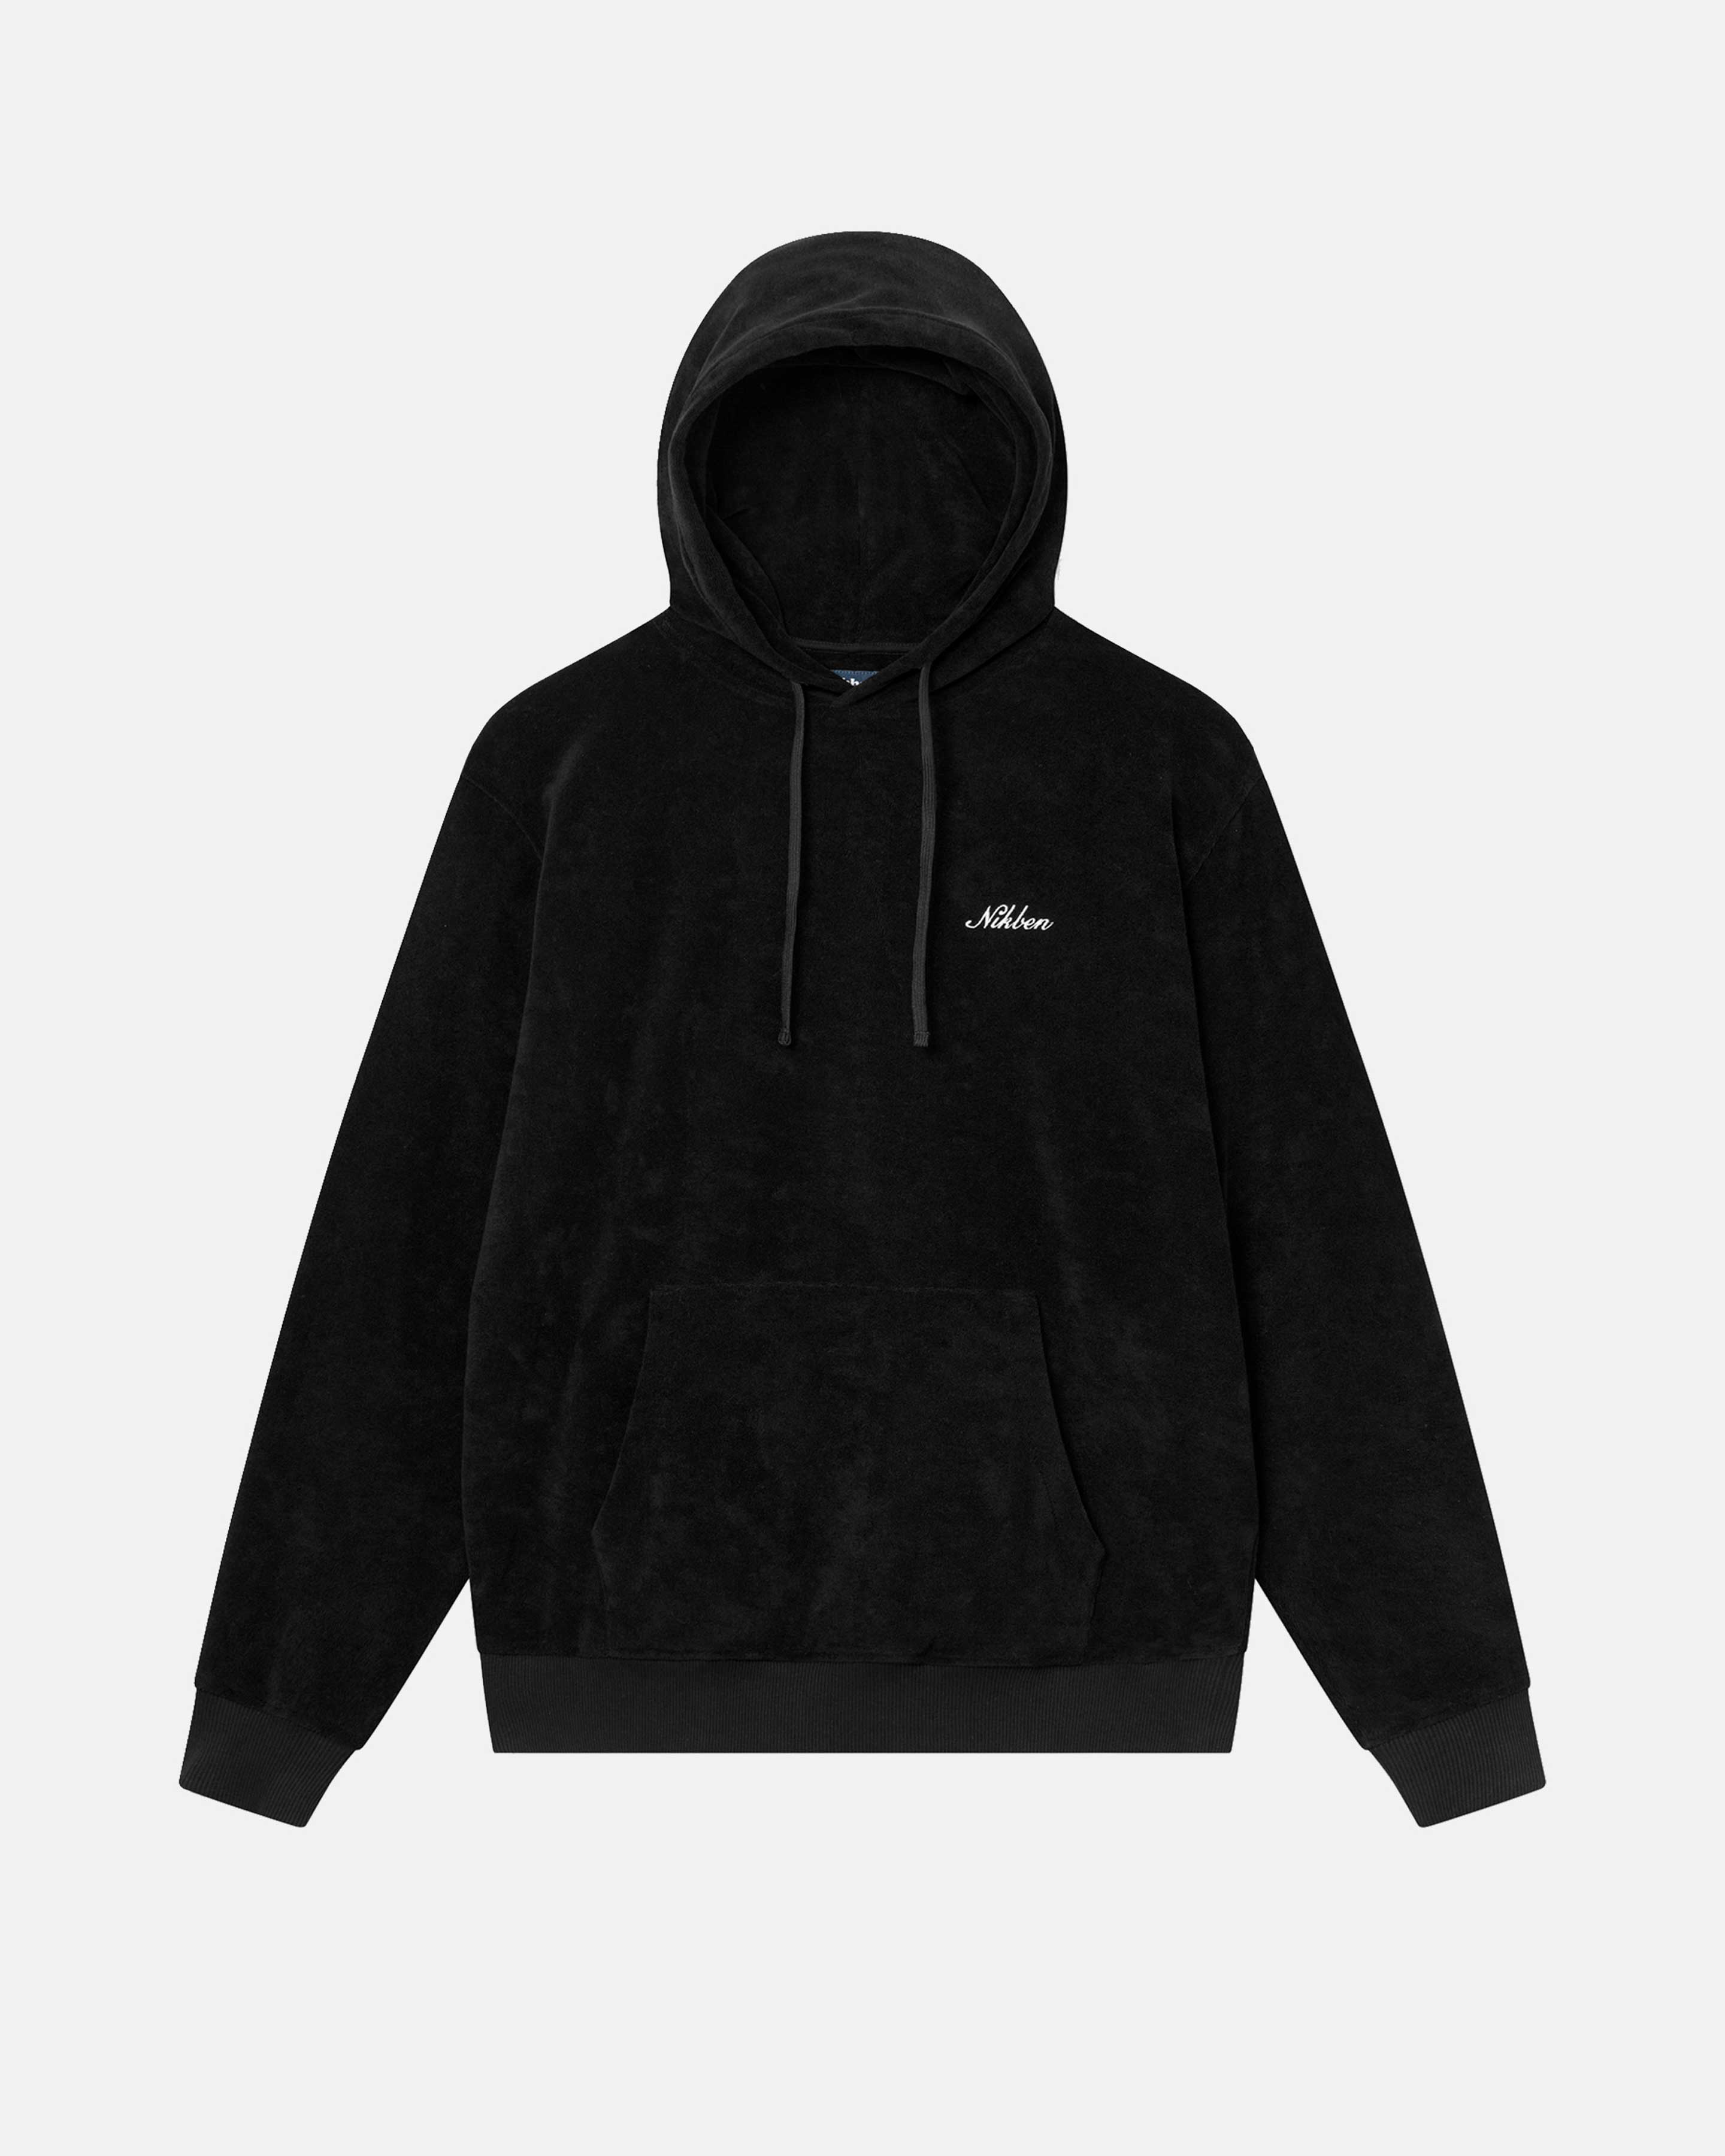 Black hoodie made from terry toweling cloth. It features drawstrings, a single front pocket, and a stitched 